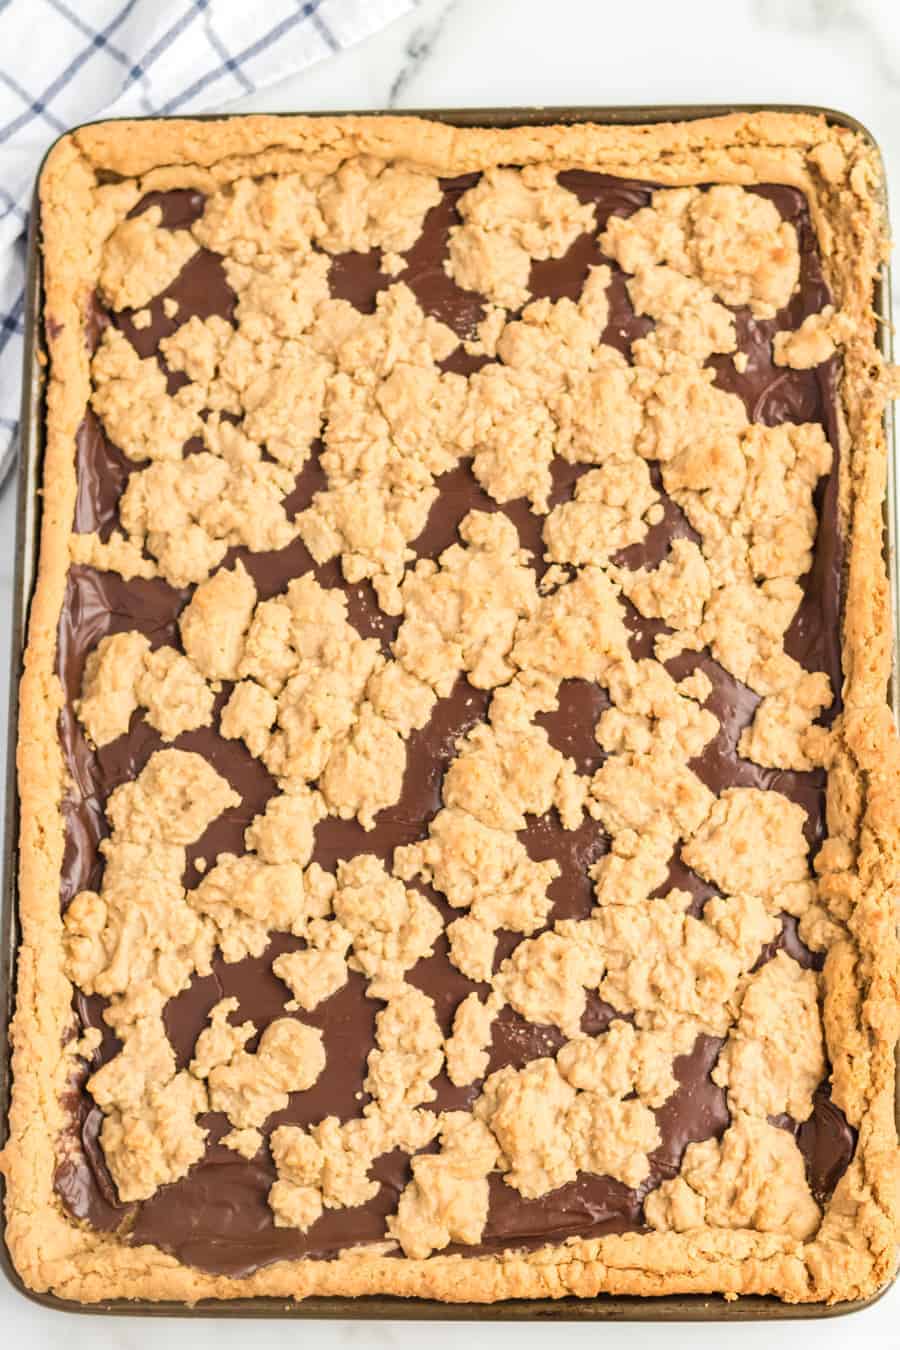 Perfectly equal parts chewy, crusty, and soft, these Peanut Butter Oat Jumbles bars are one of the best chocolate-peanut butter cookie desserts around.